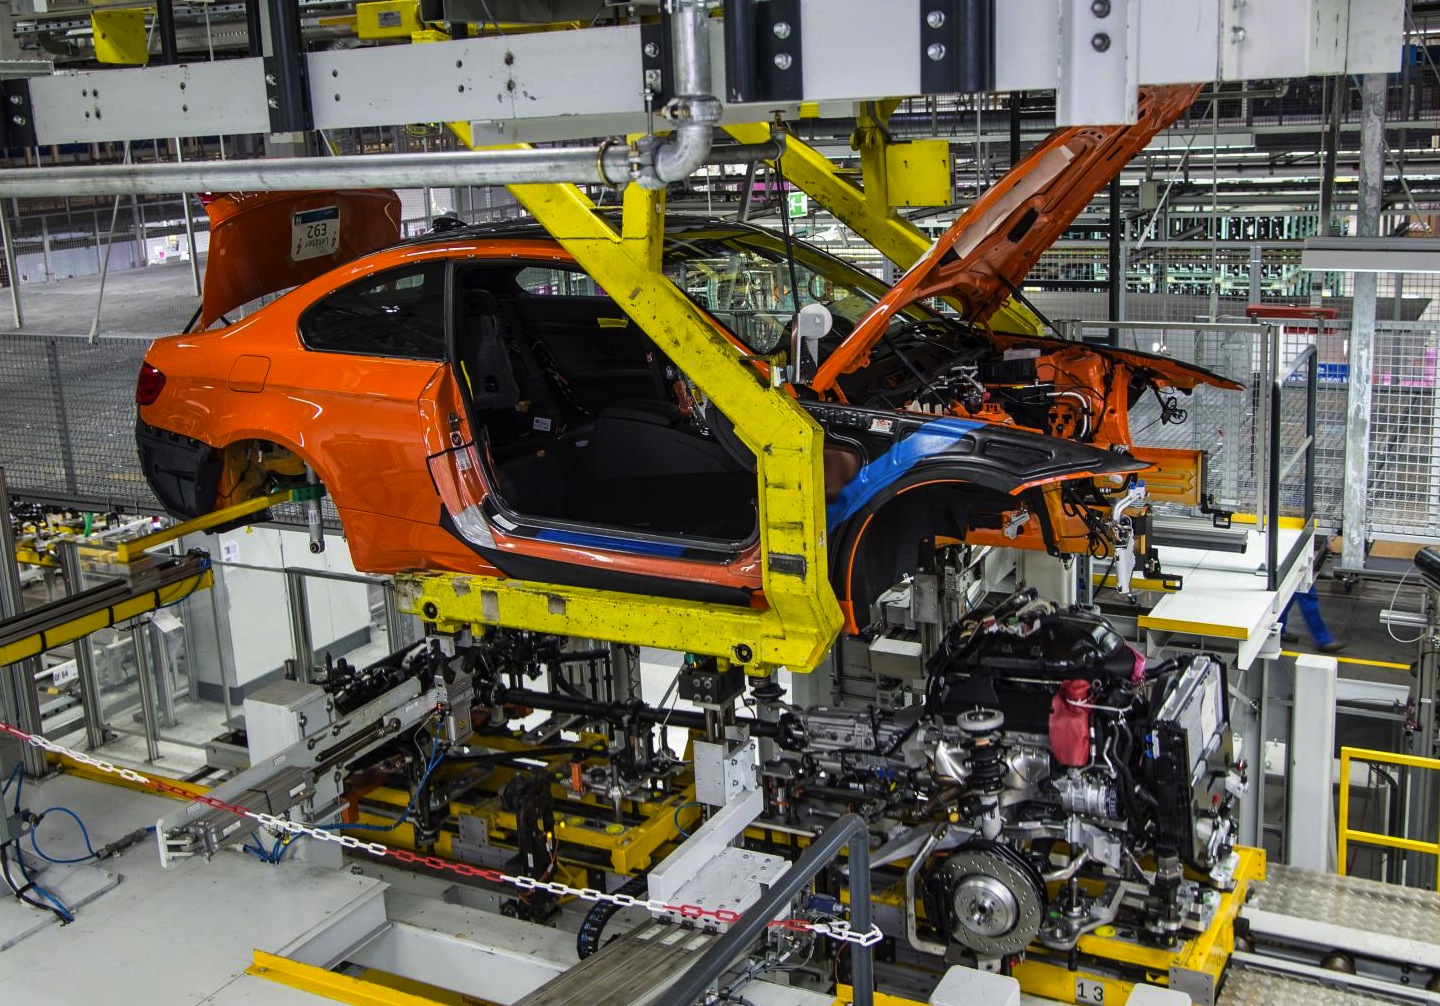 E92 BMW M3 Coupe production ends, making way for F30